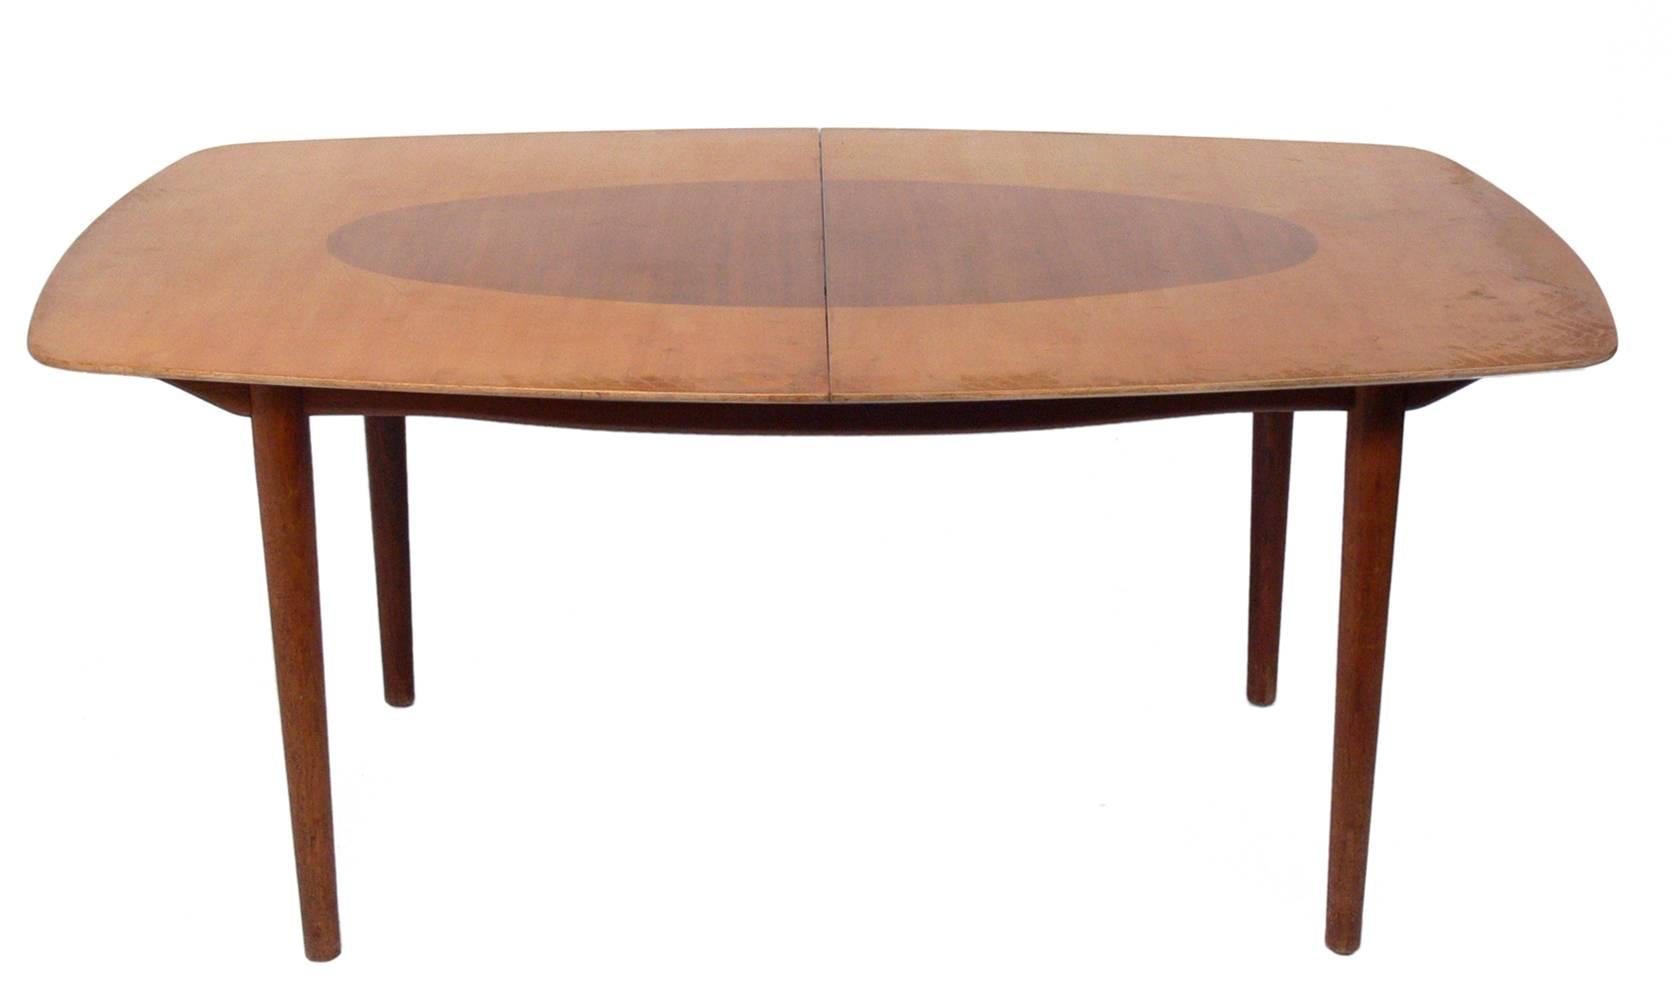 Maple Danish Modern Dining Table and Four Chairs by Finn Juhl